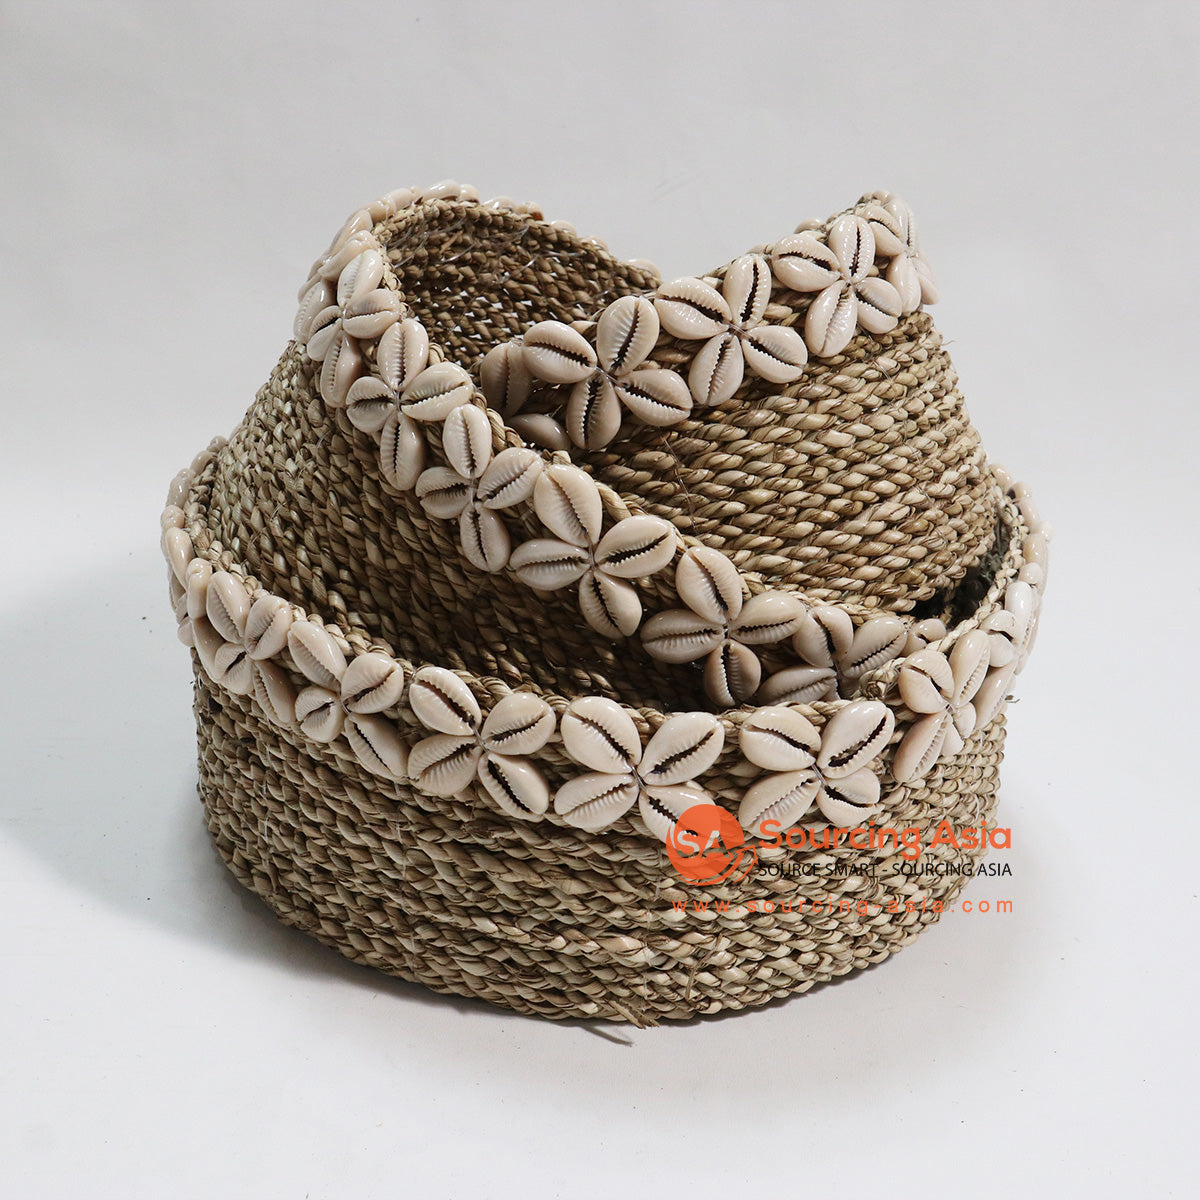 HBSC043-2 SET OF THREE NATURAL SEAGRASS BASKETS WITH SHELL ORNAMENT